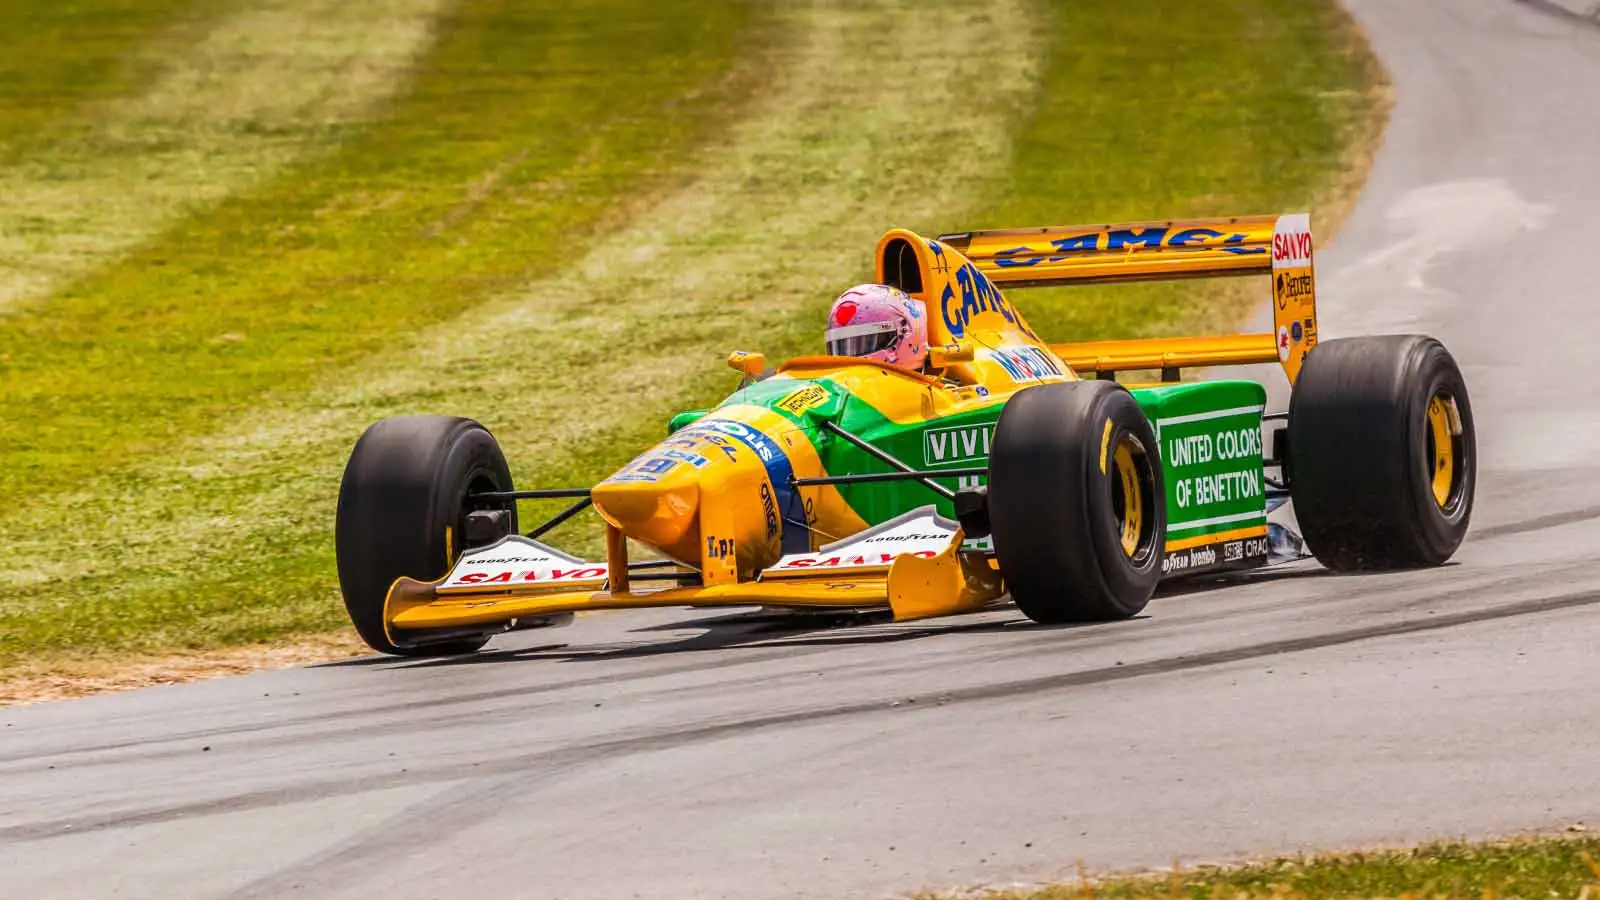 A Benetton F1 car is driven. Goodwood July 2014.